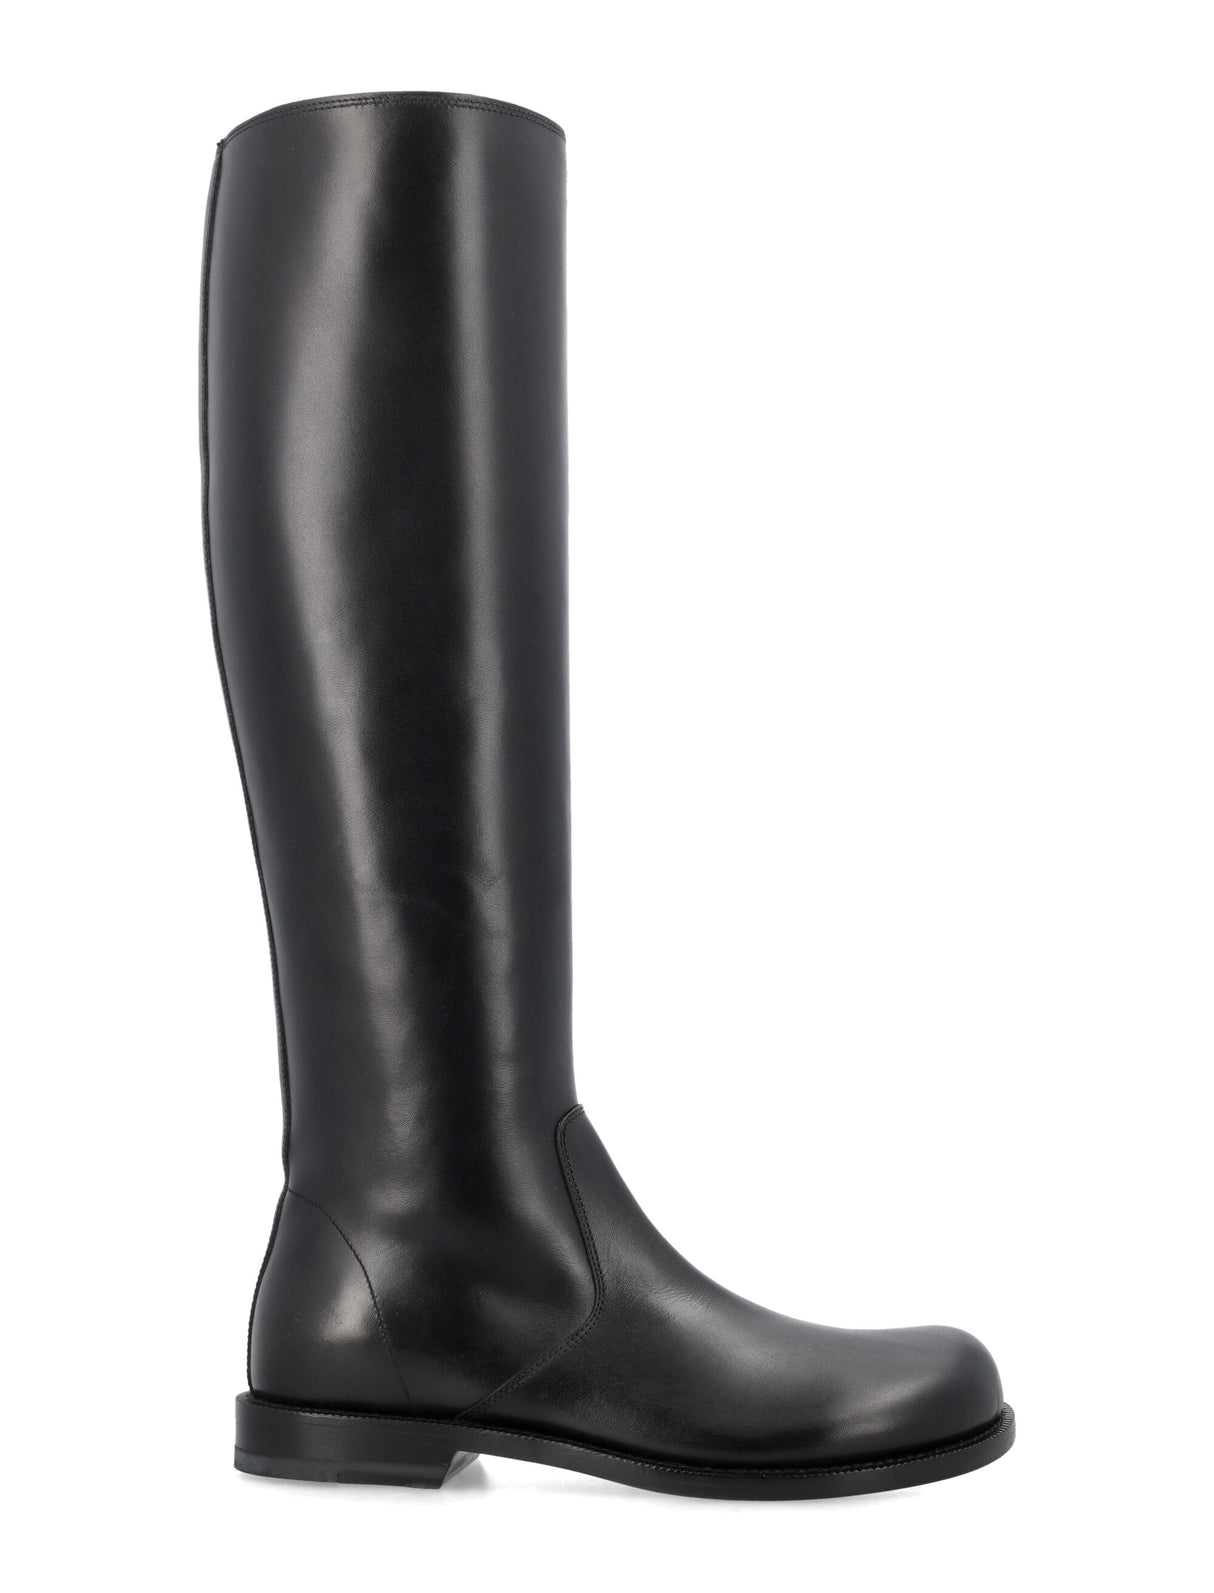 LOEWE Black High Shaft Leather Boots for Women